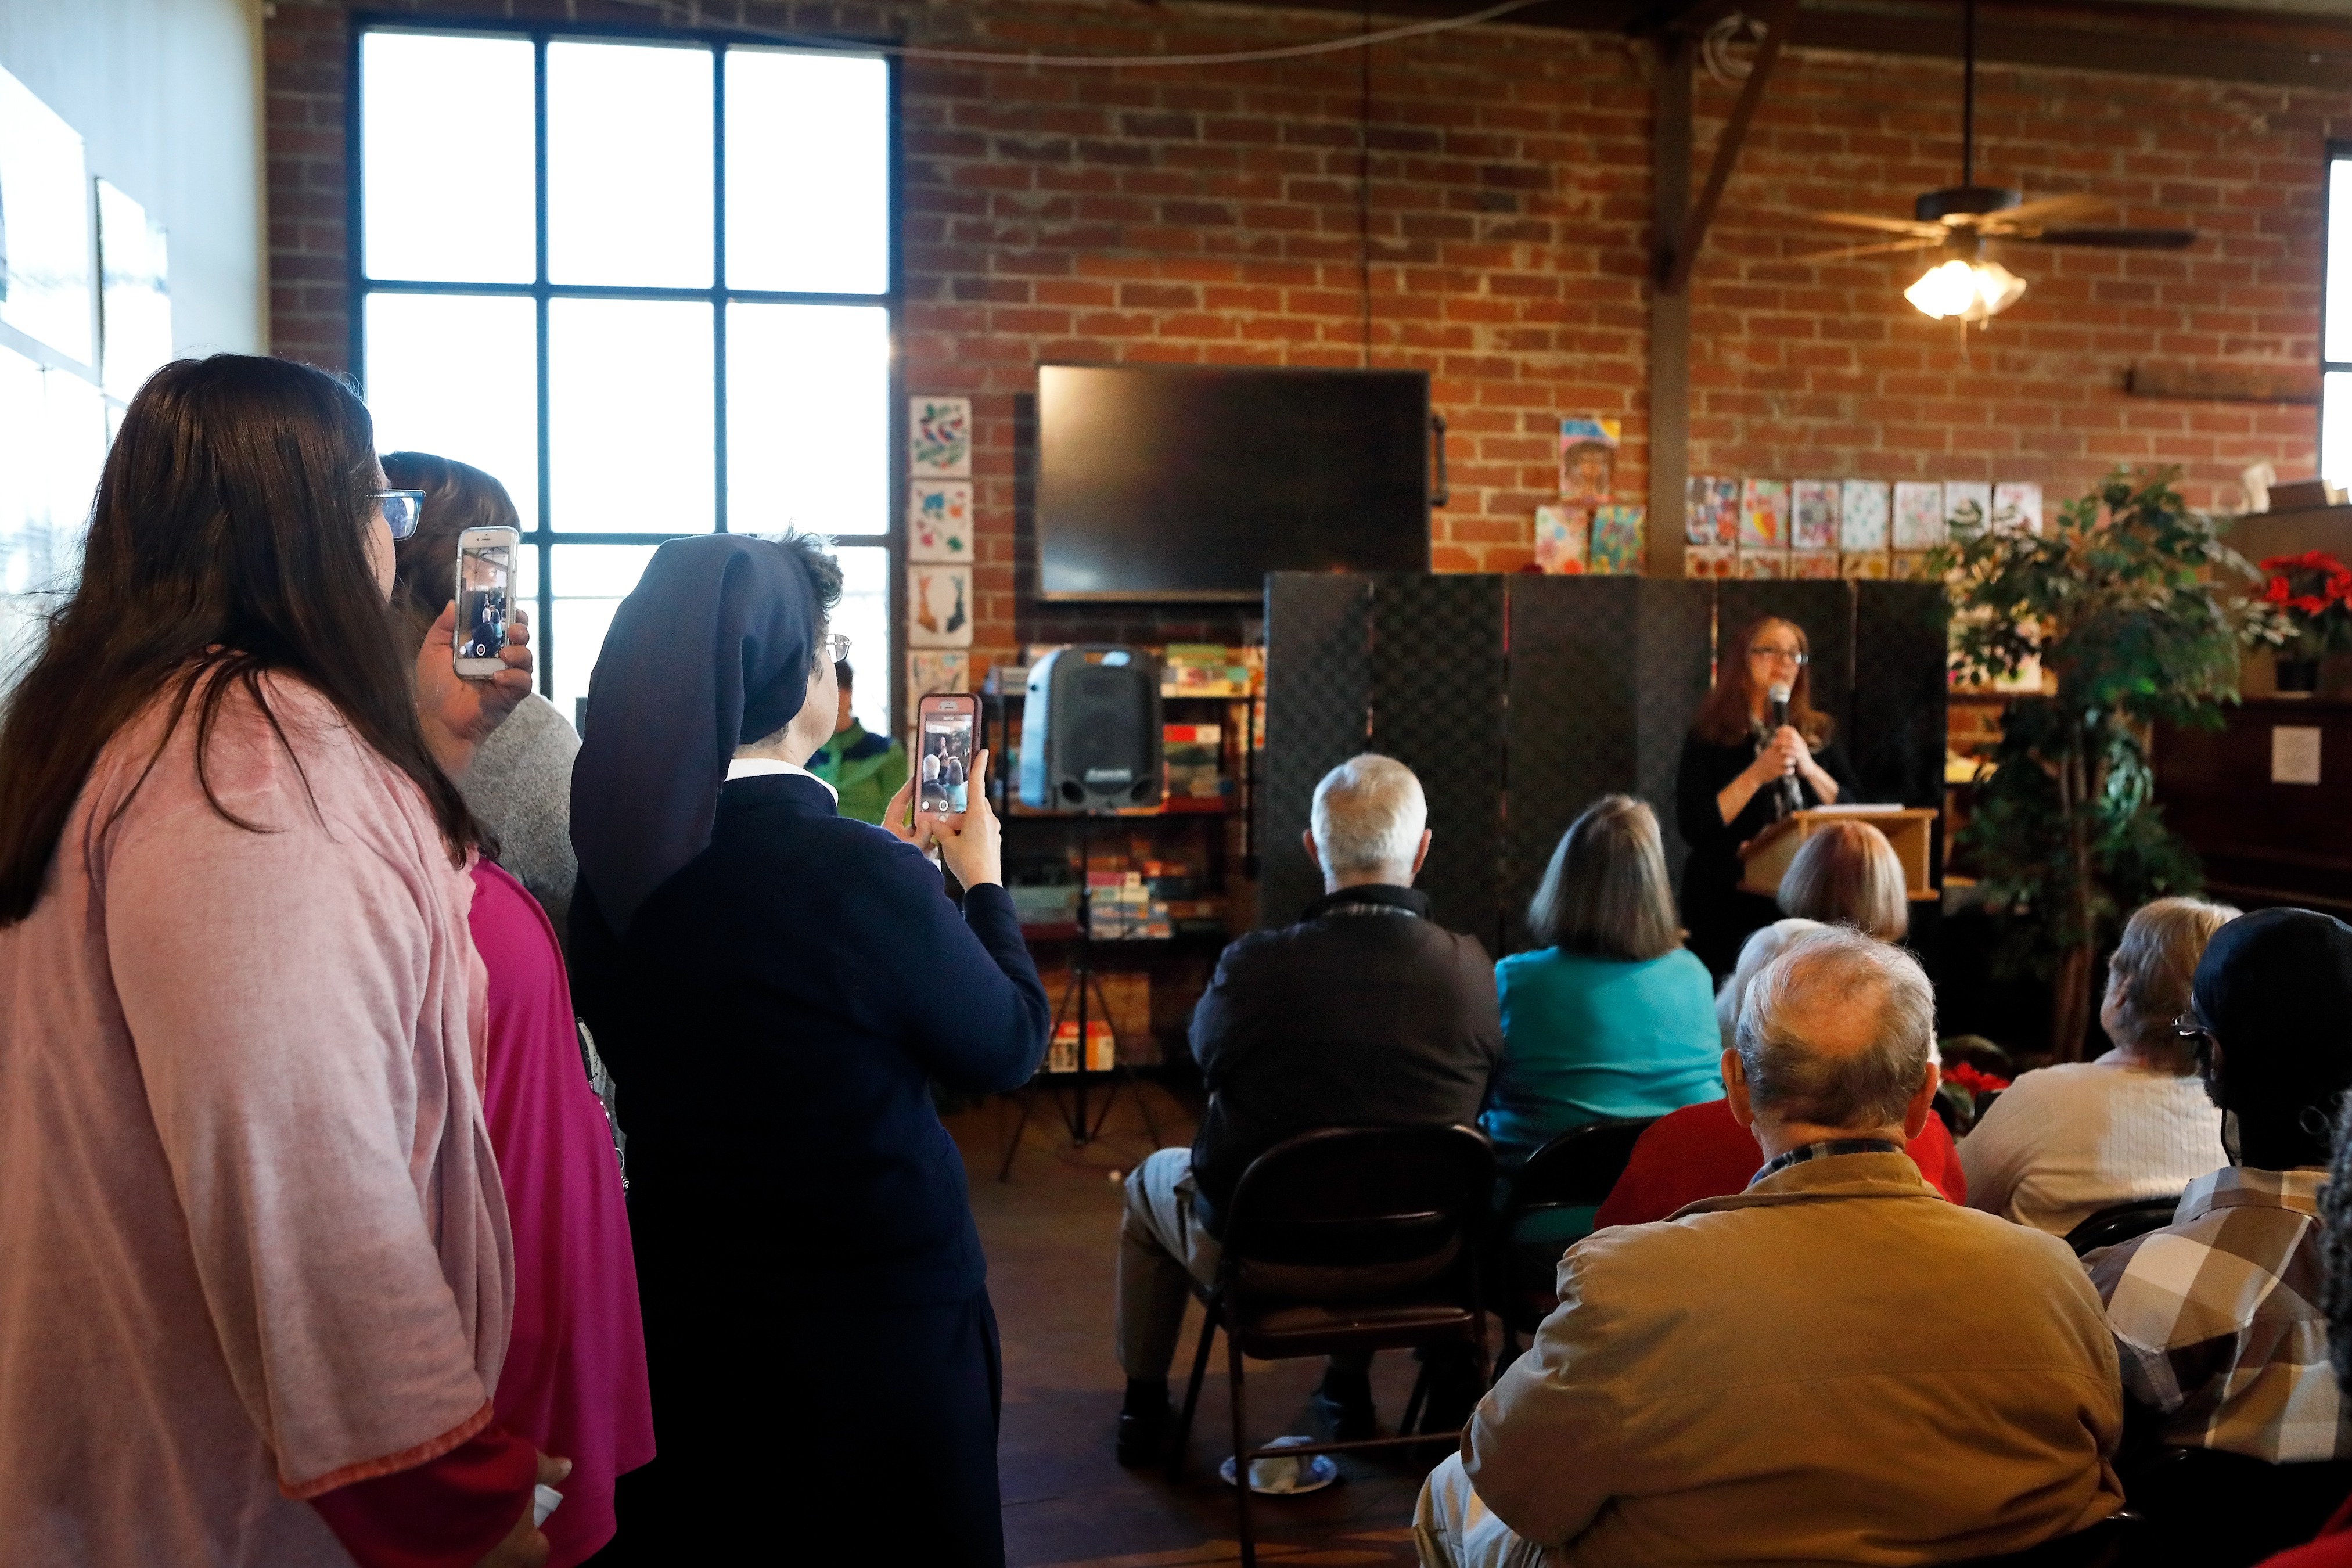 Community member Lisa Cannon speaks about how Daybreak provided her with spiritual care and physical support, as Daybreak director Sister Theresa Sullivan (second from left) records the moment.